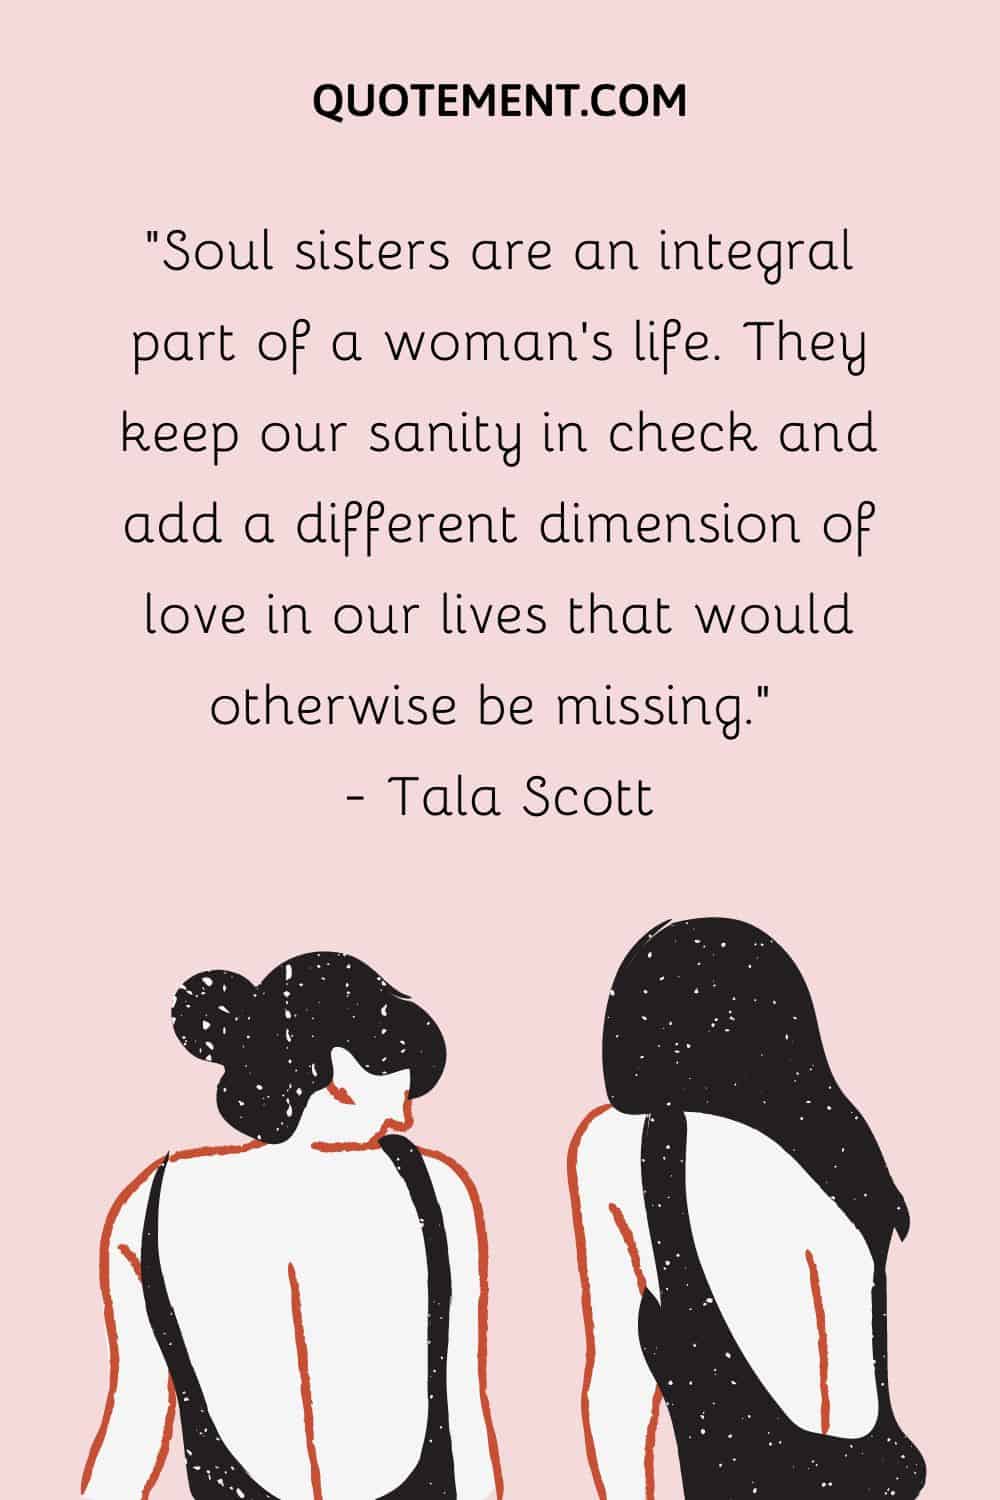 Soul sisters are an integral part of a woman's life